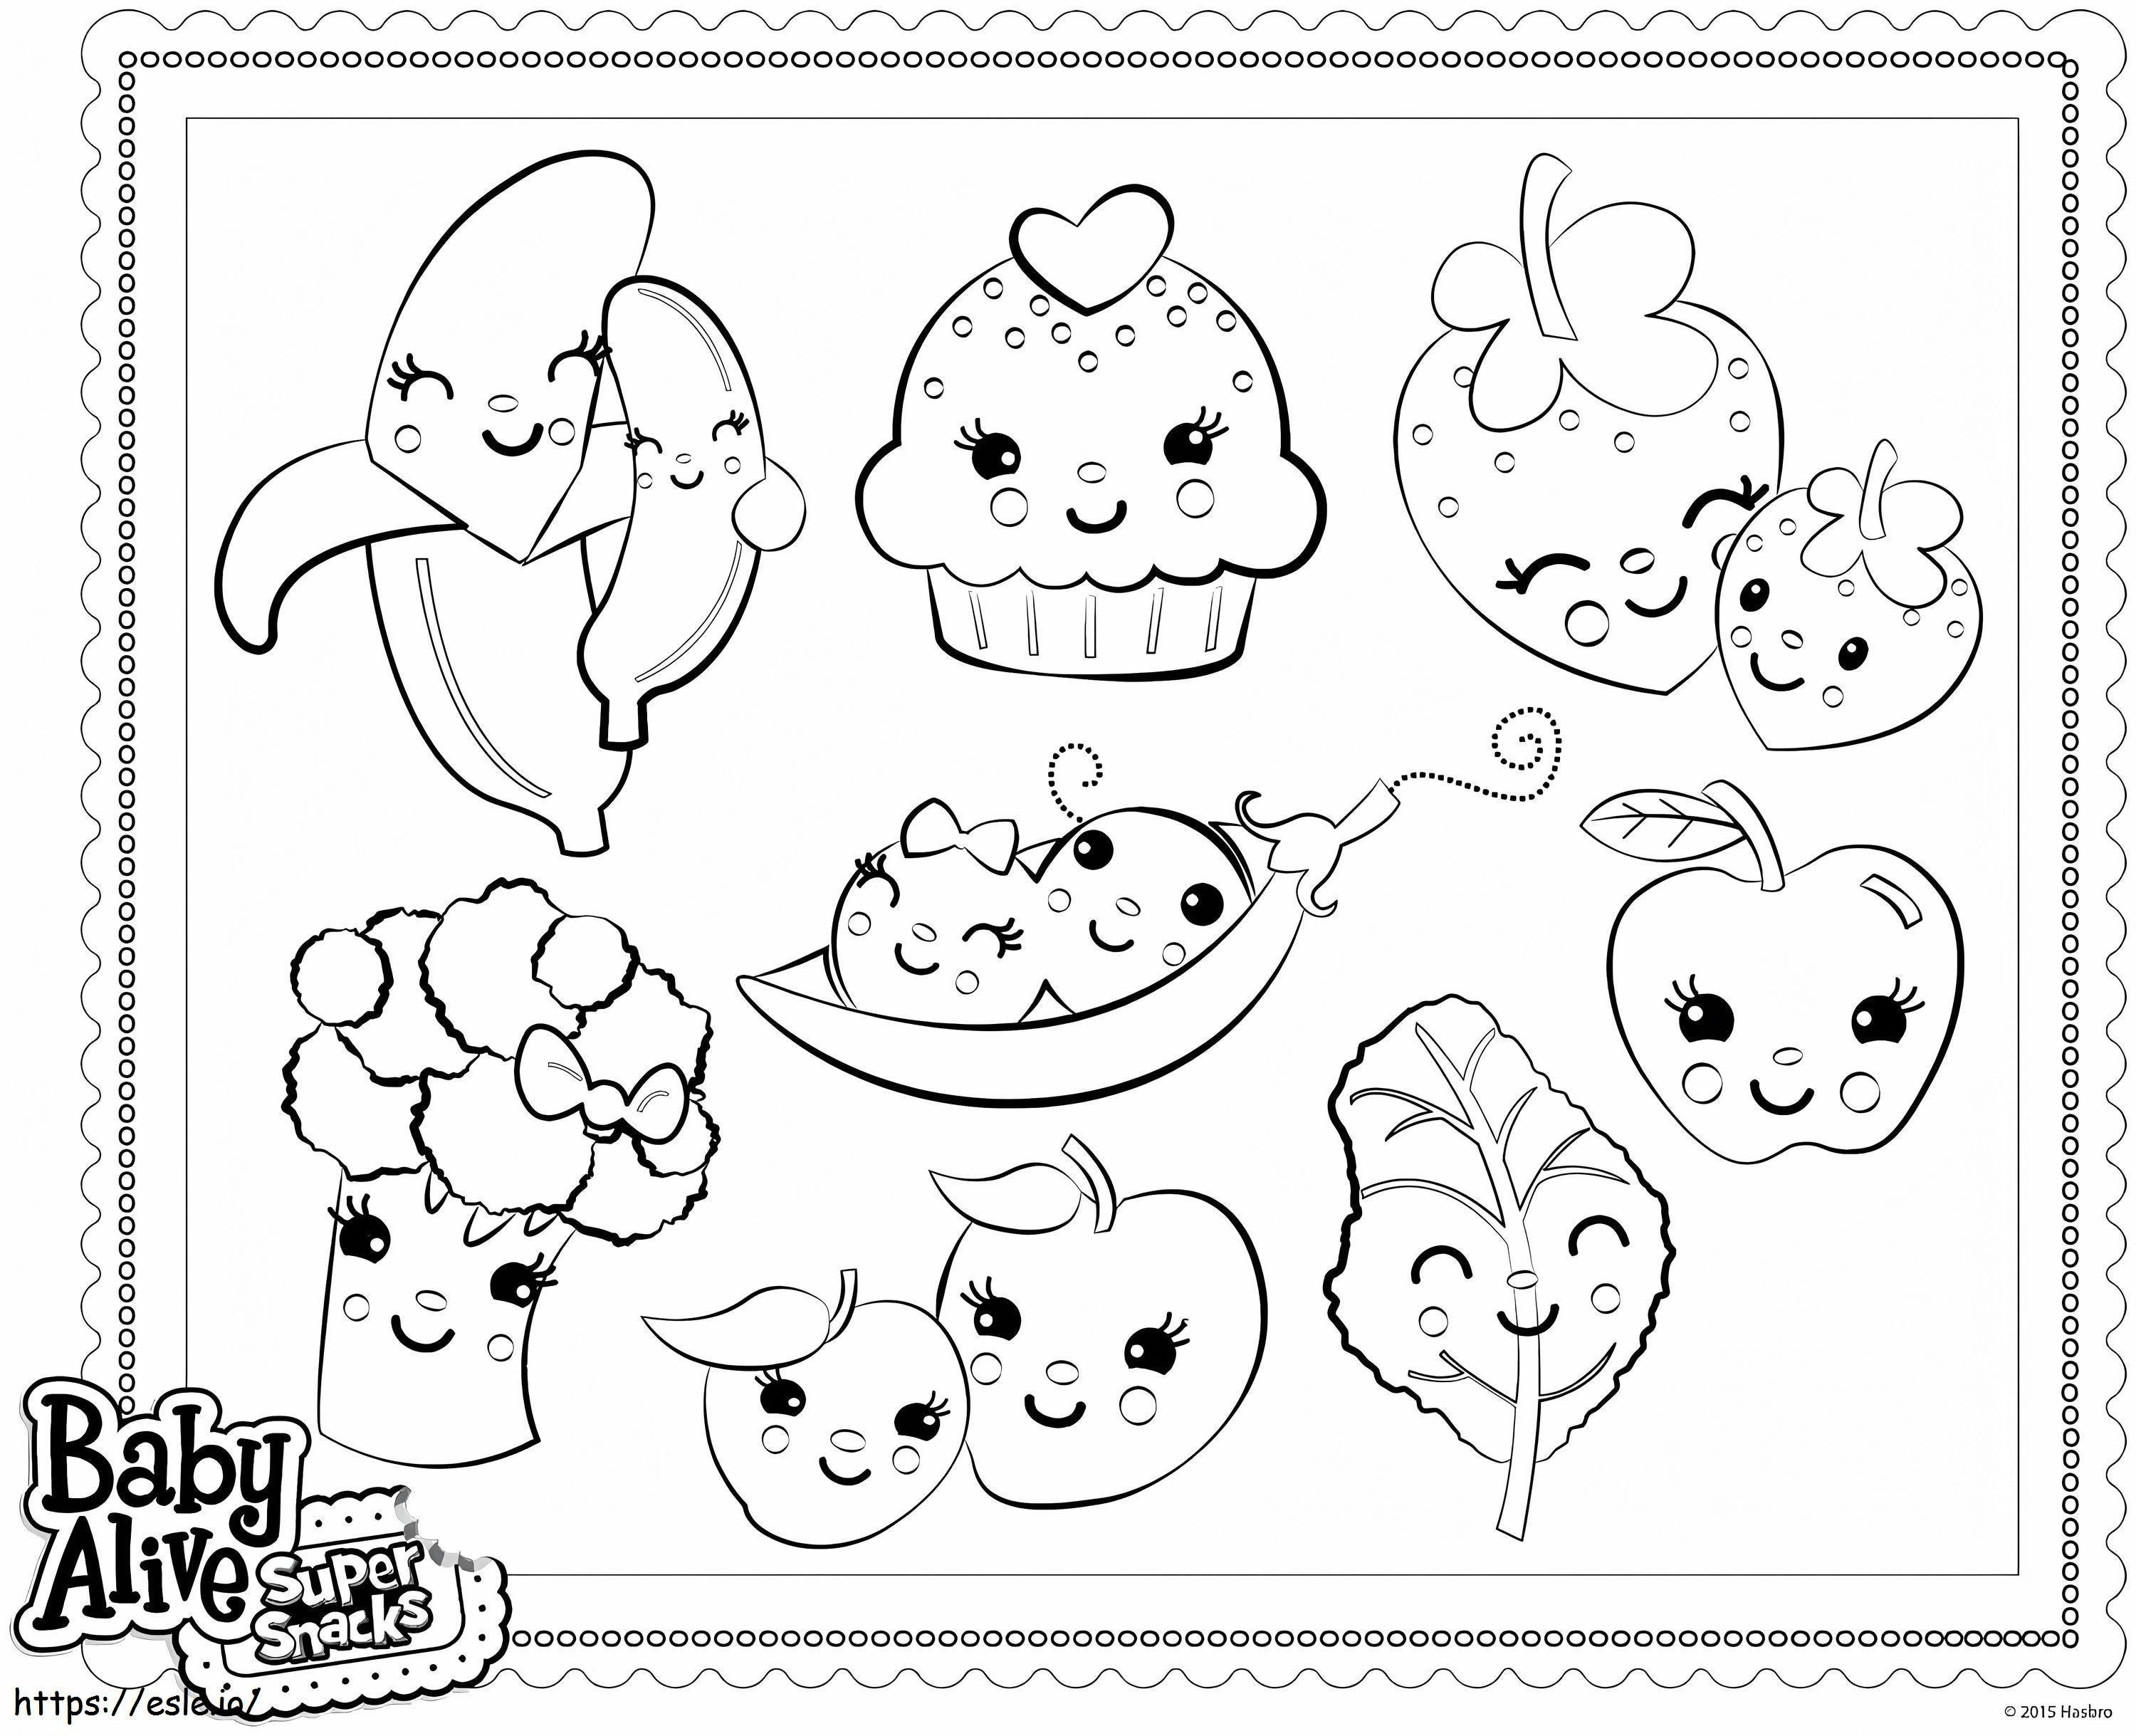 Baby Alive Super Snacks coloring page